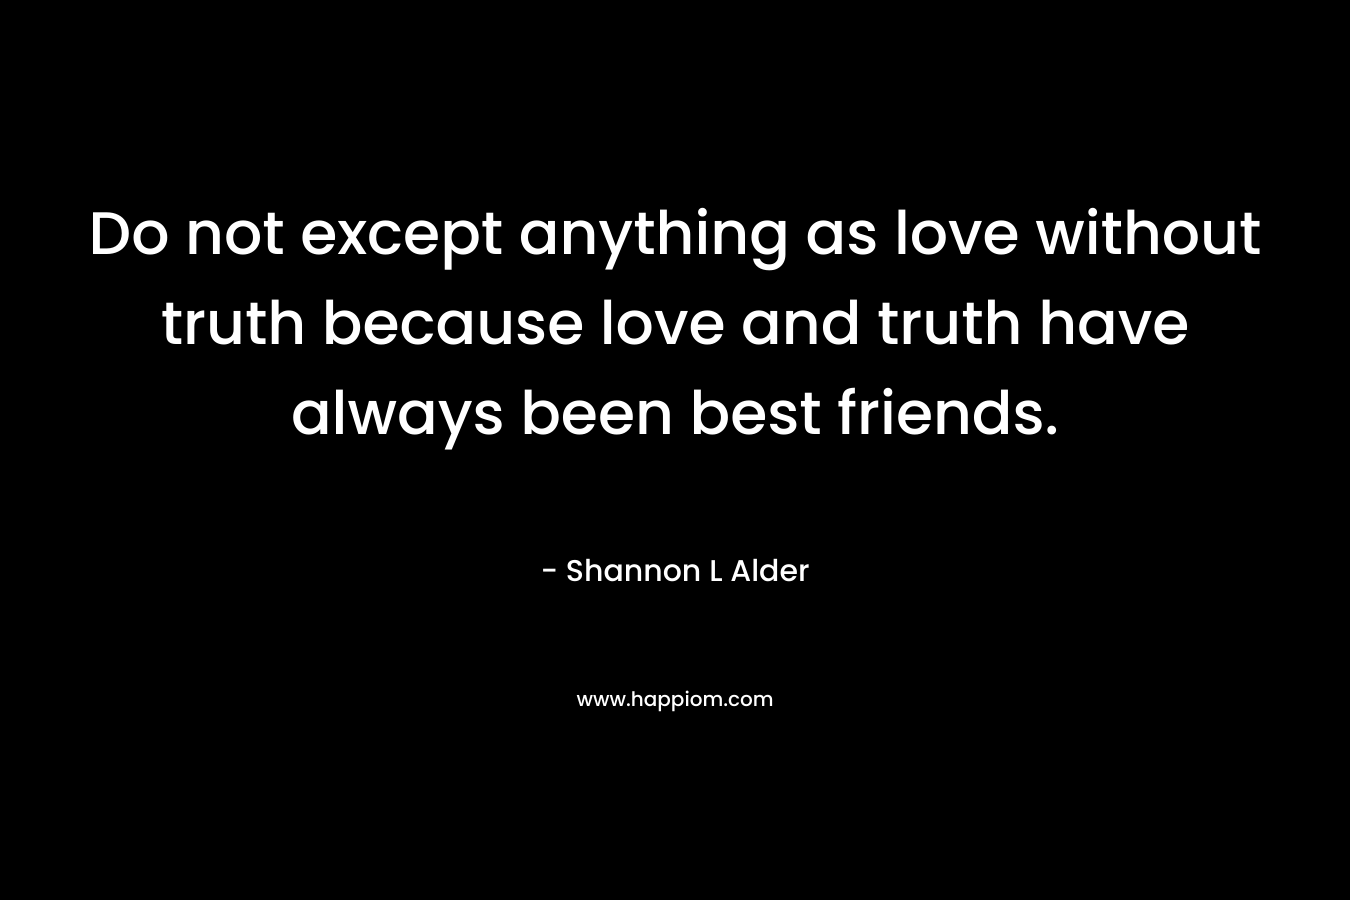 Do not except anything as love without truth because love and truth have always been best friends.